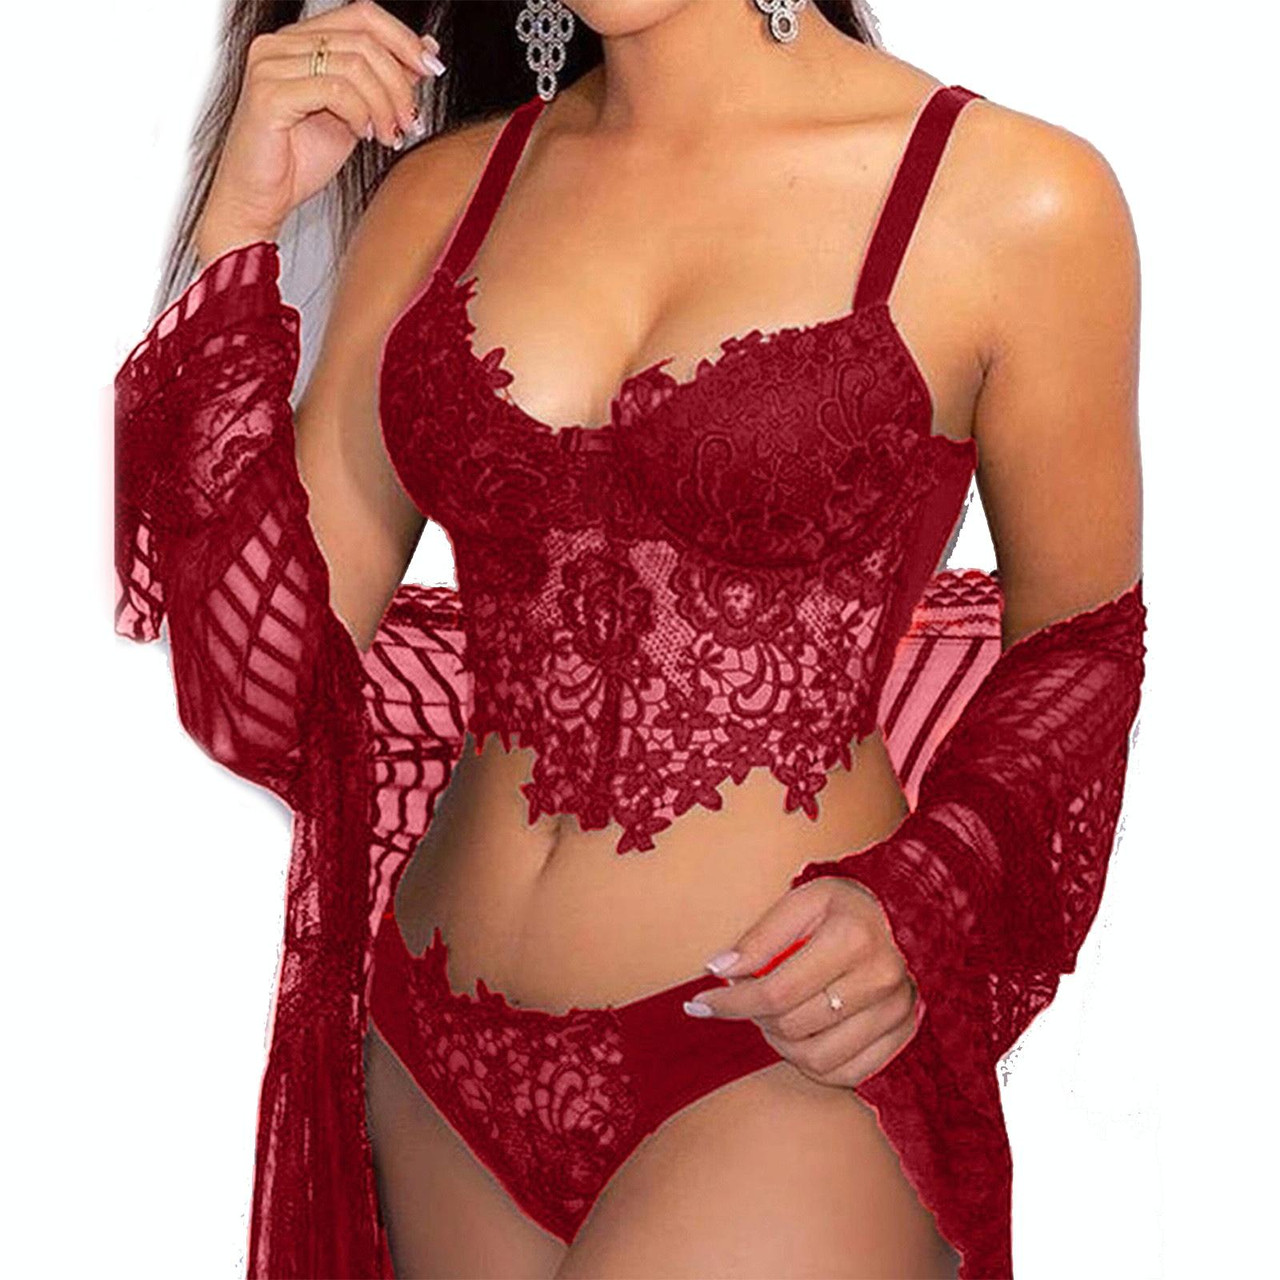 Sexy Lingerie Set, 2Pcs Women Lace Babydoll Sexy Underwear Lace  Bra+G-String Panties Soft Bras Sets for Adult Girlfriend Gift (Red L)